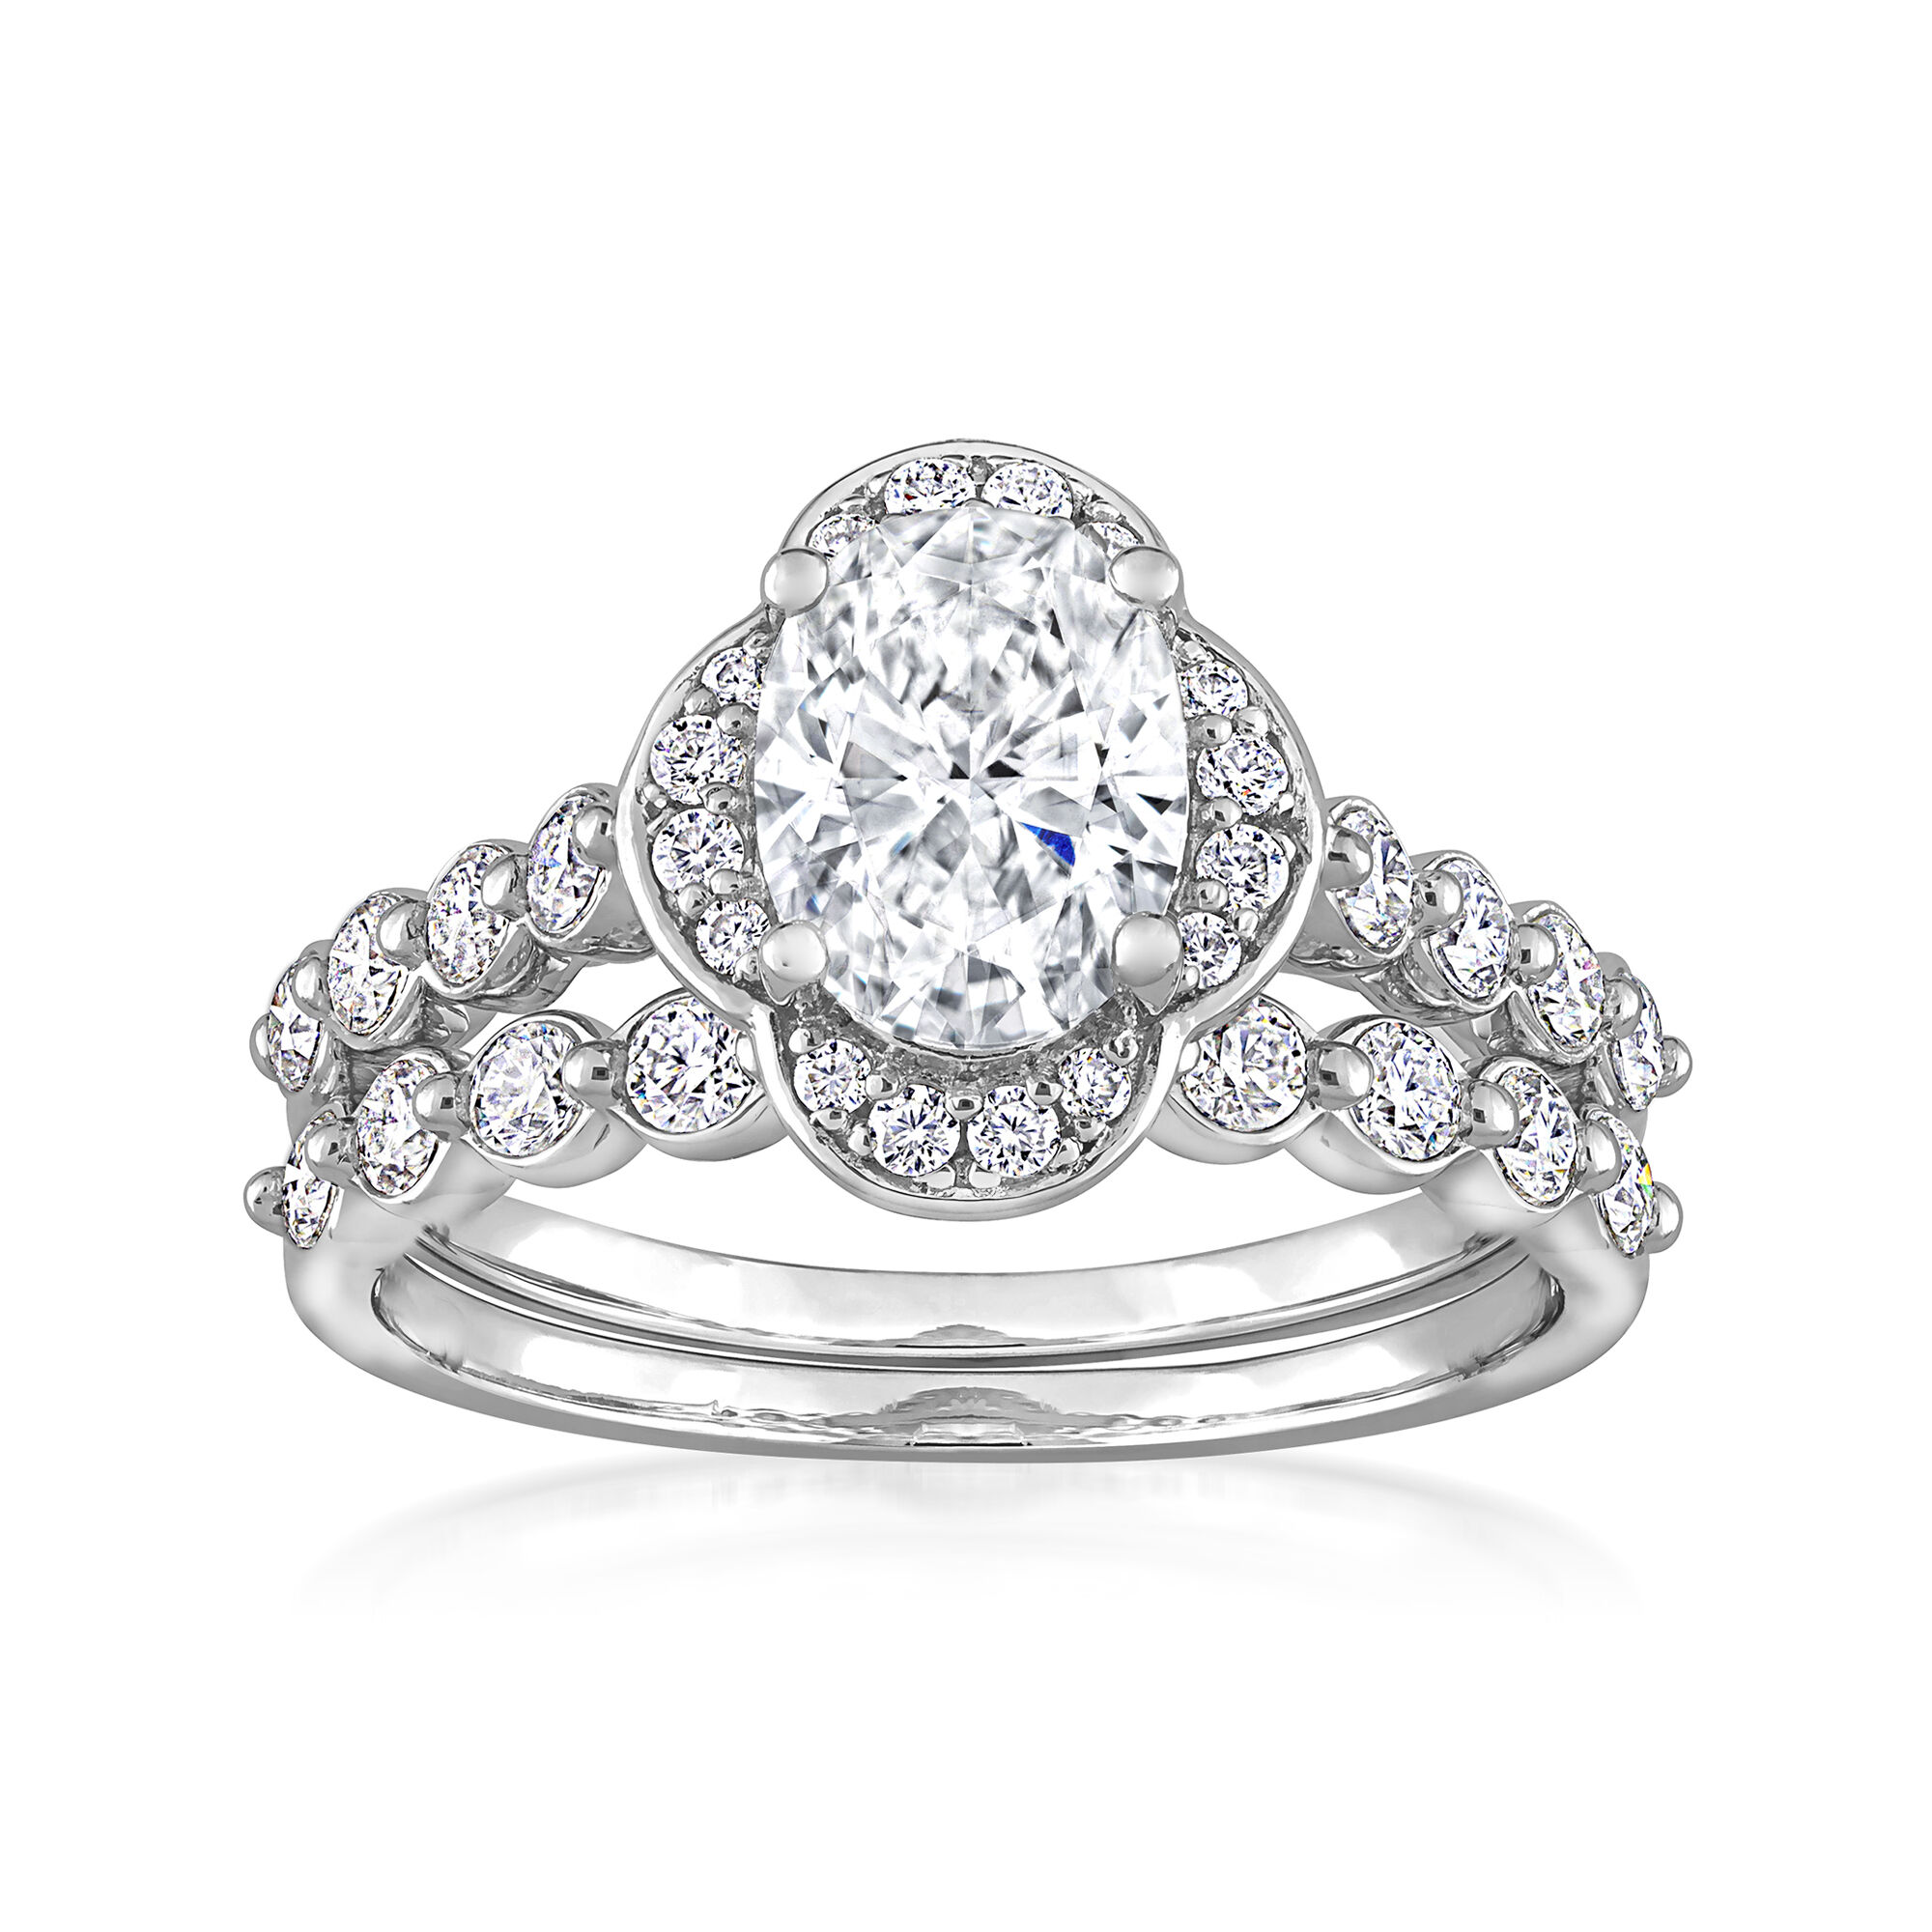 1.92 ct. t.w. Moissanite Bridal Set: Engagement and Wedding Rings